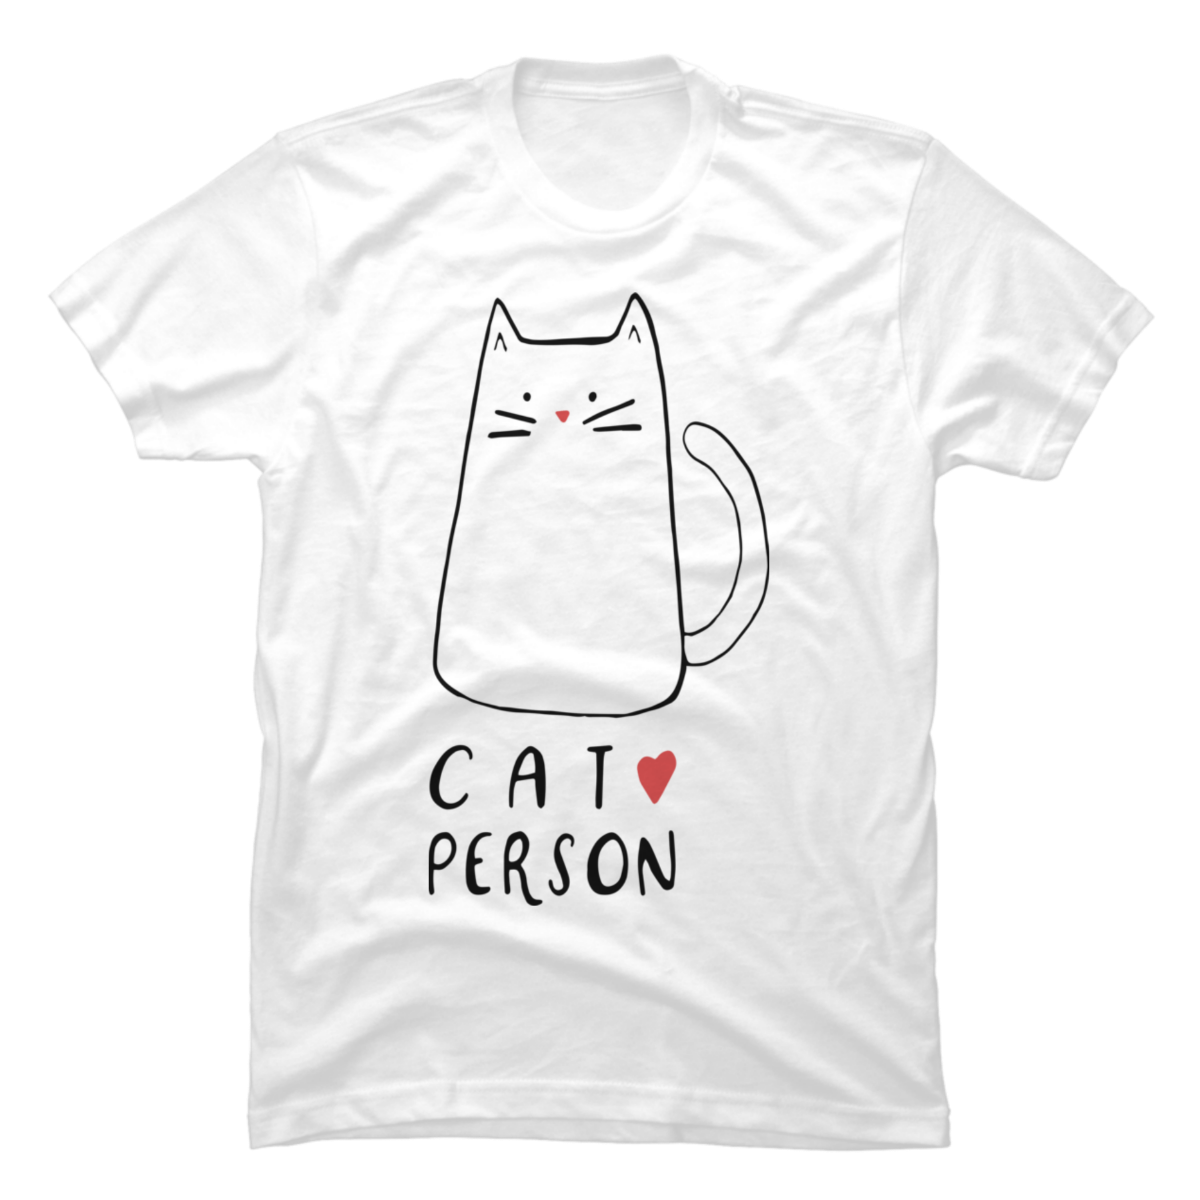 cat person t shirt